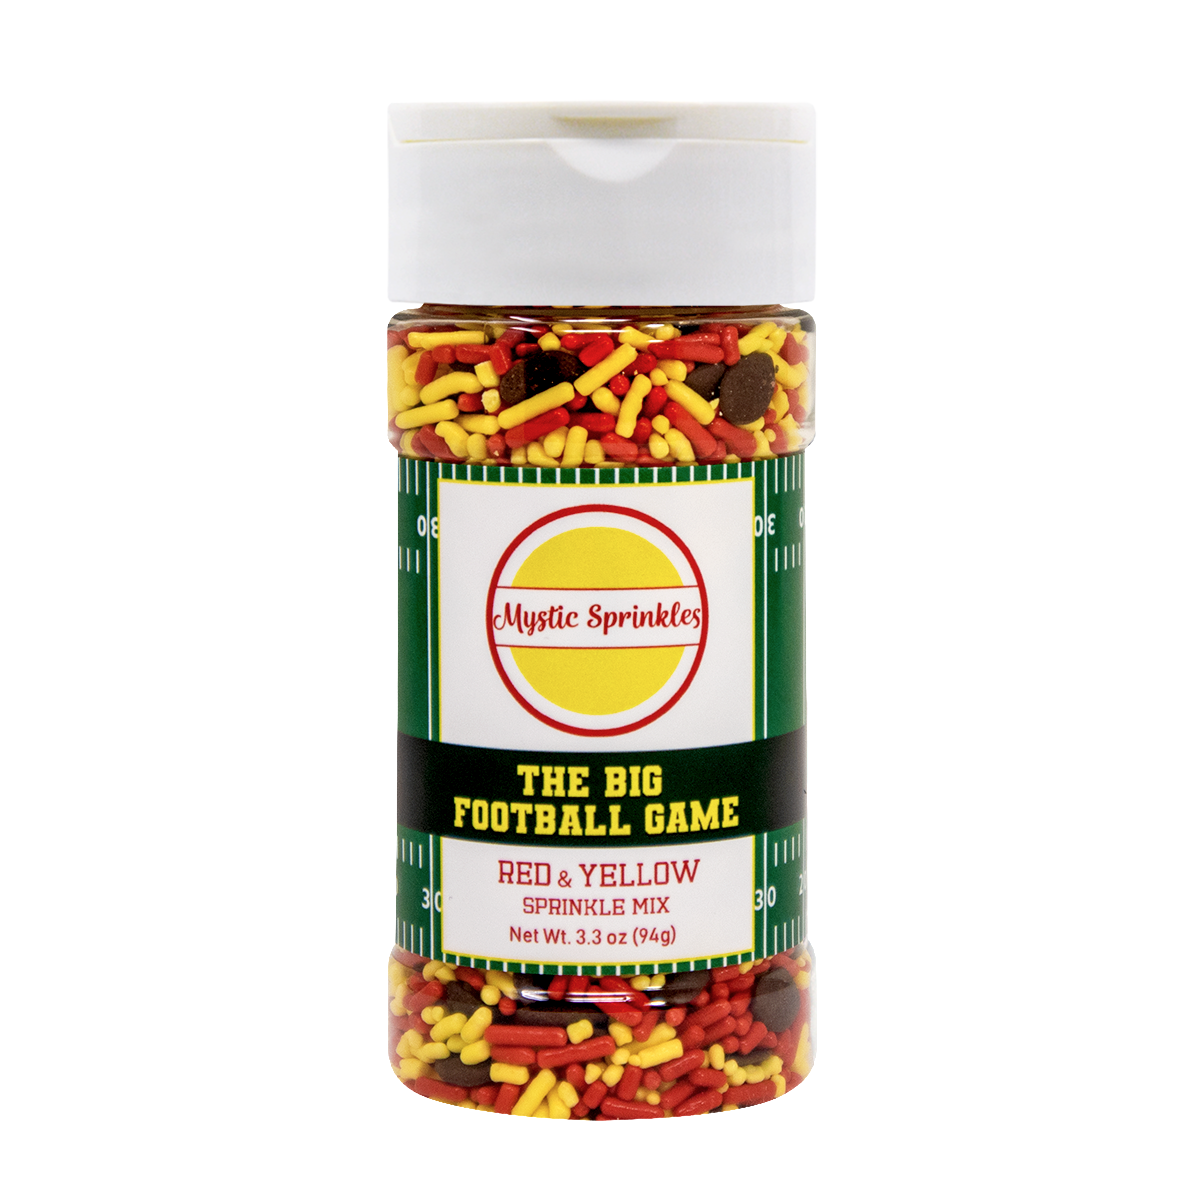 The Big Football Game - Red & Yellow Sprinkle Mix 3.3oz